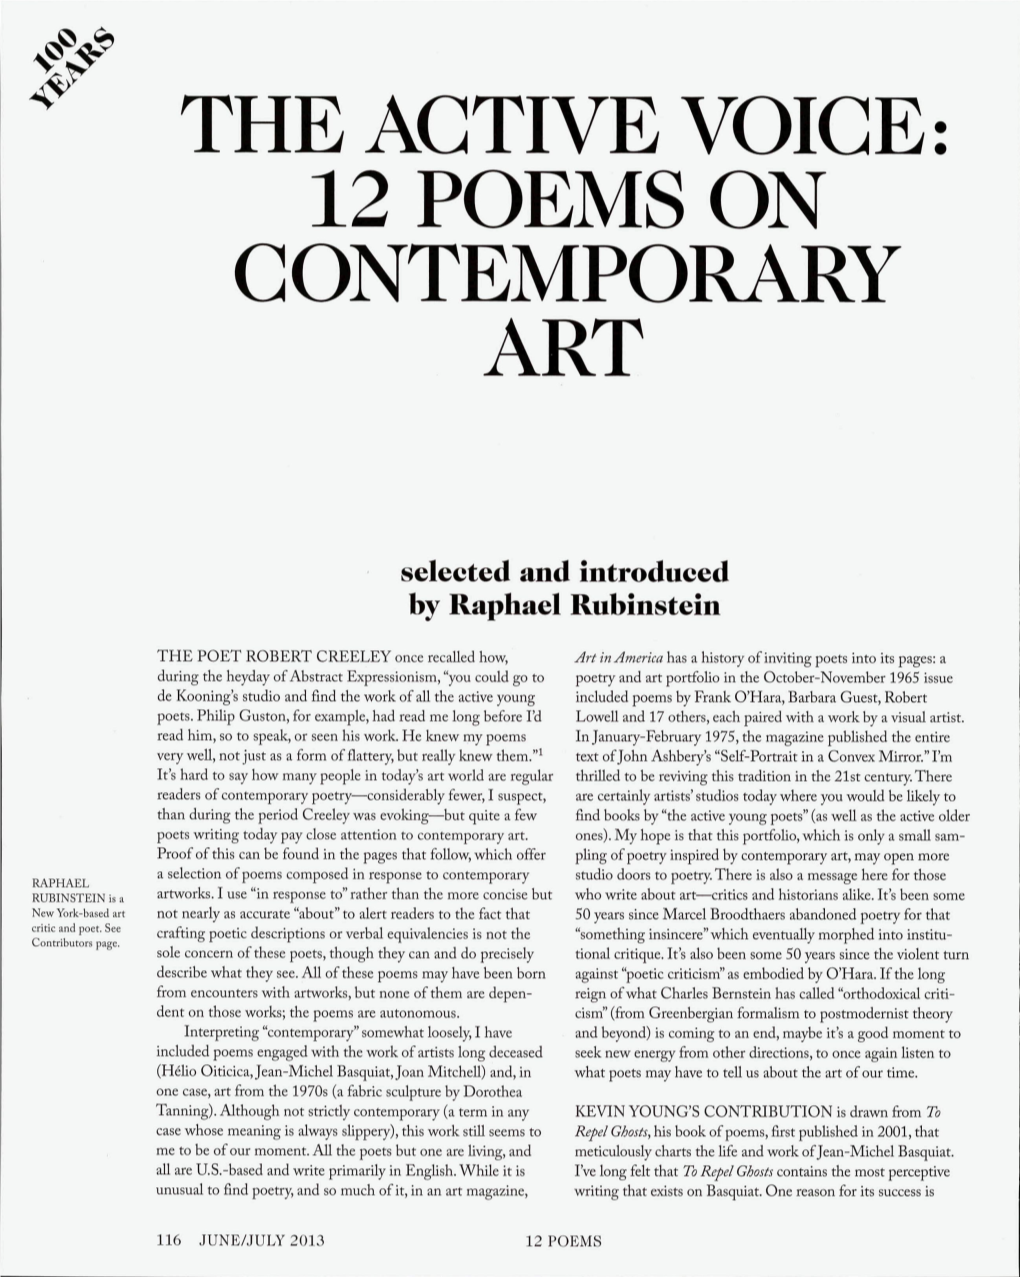 12 Poems on Contemporary Art